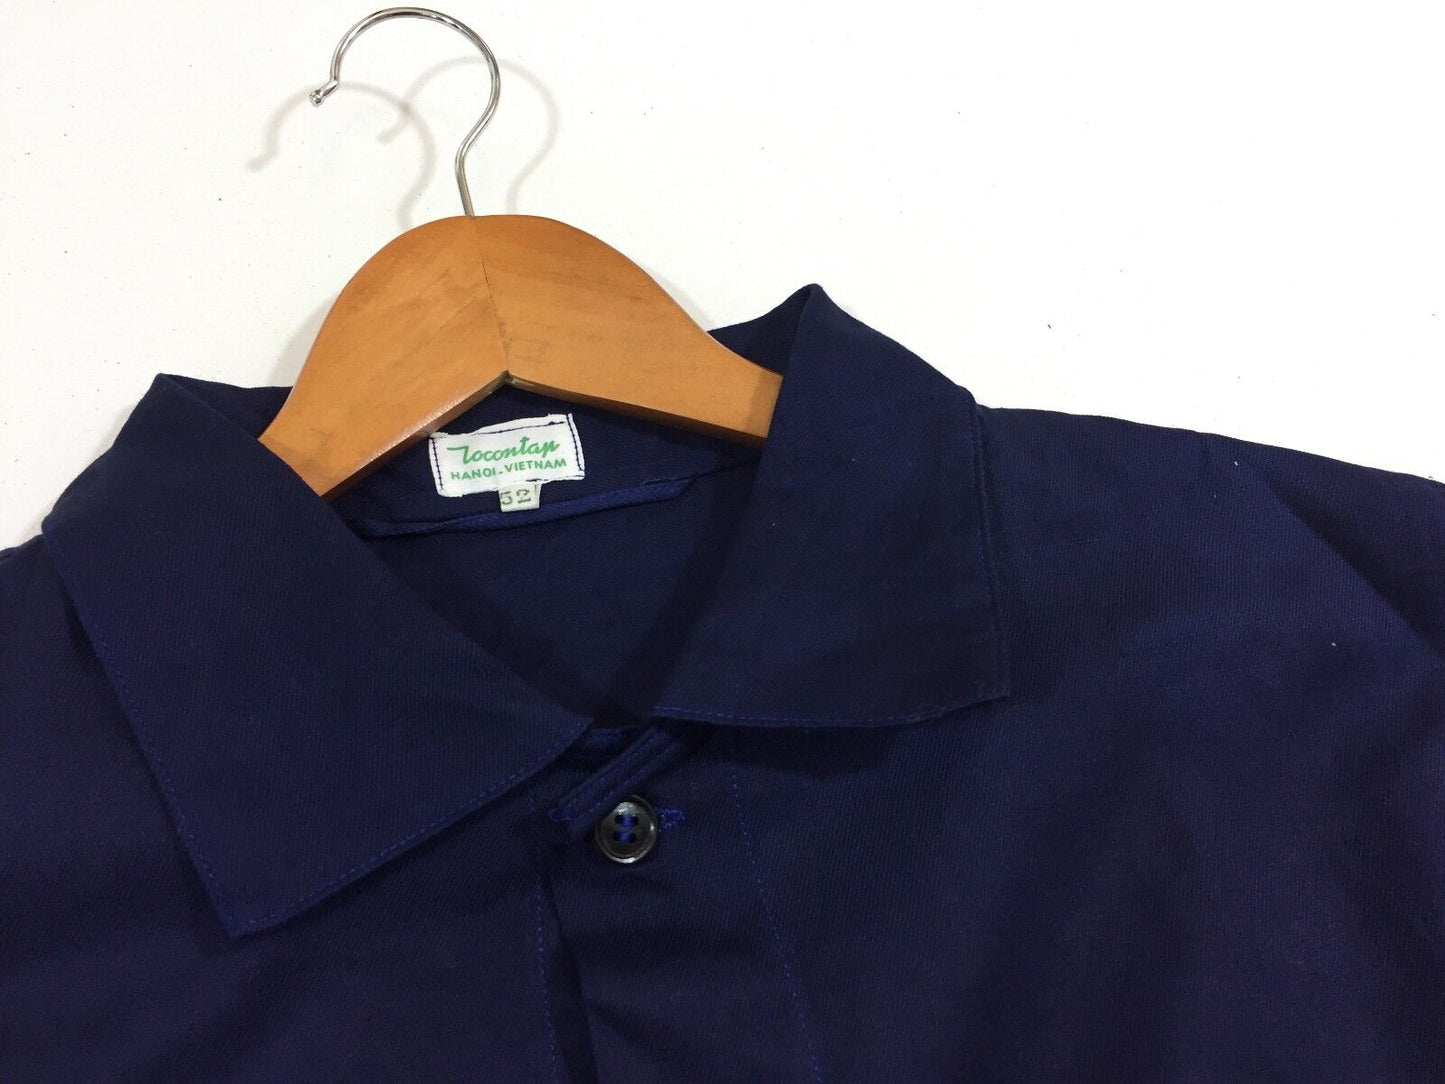 Vintage French Workwear Jackets Navy